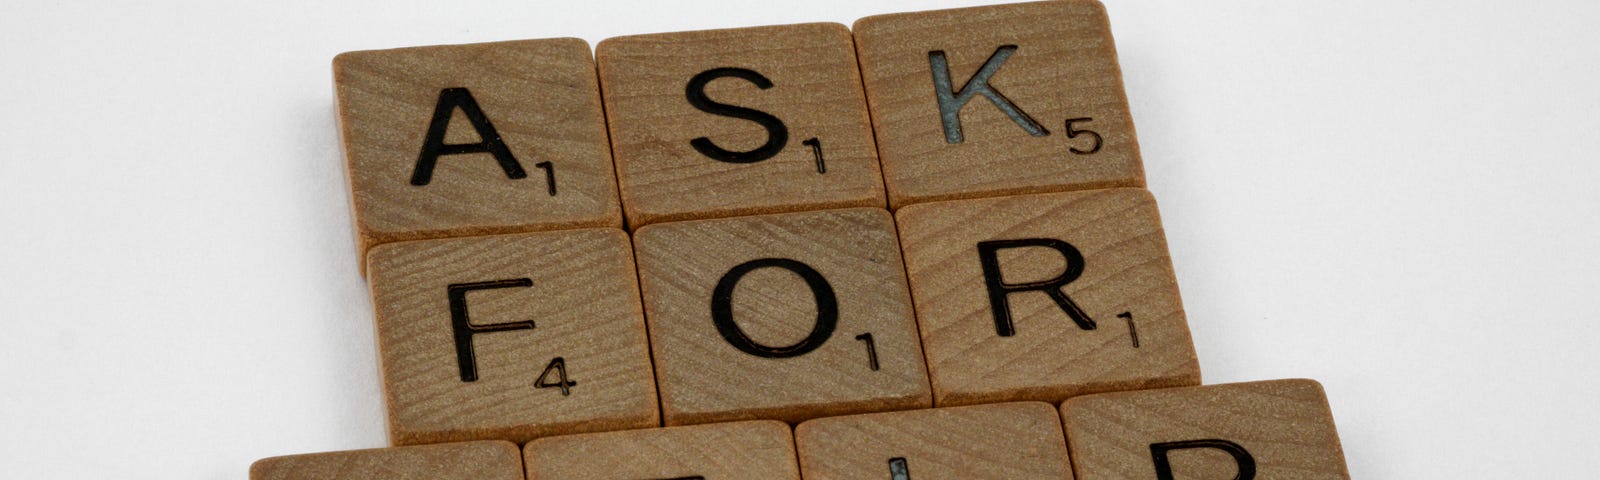 “ASK FOR HELP” written with Scrabble tiles